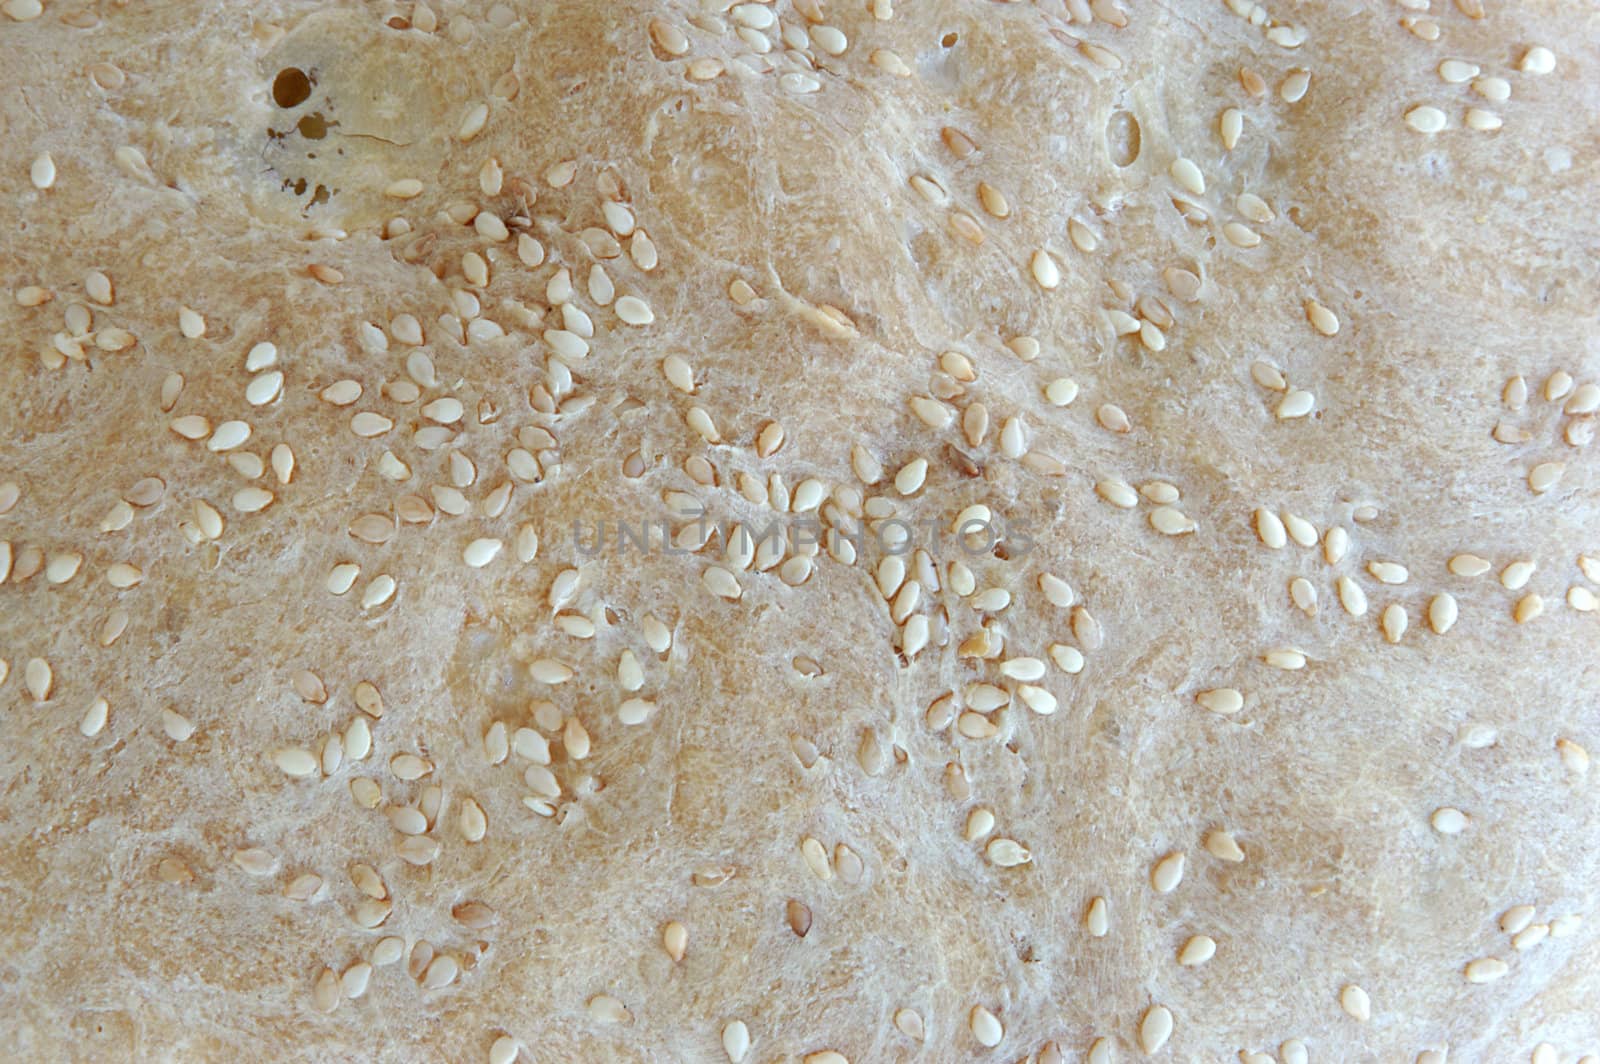 bread close up background by zenpix